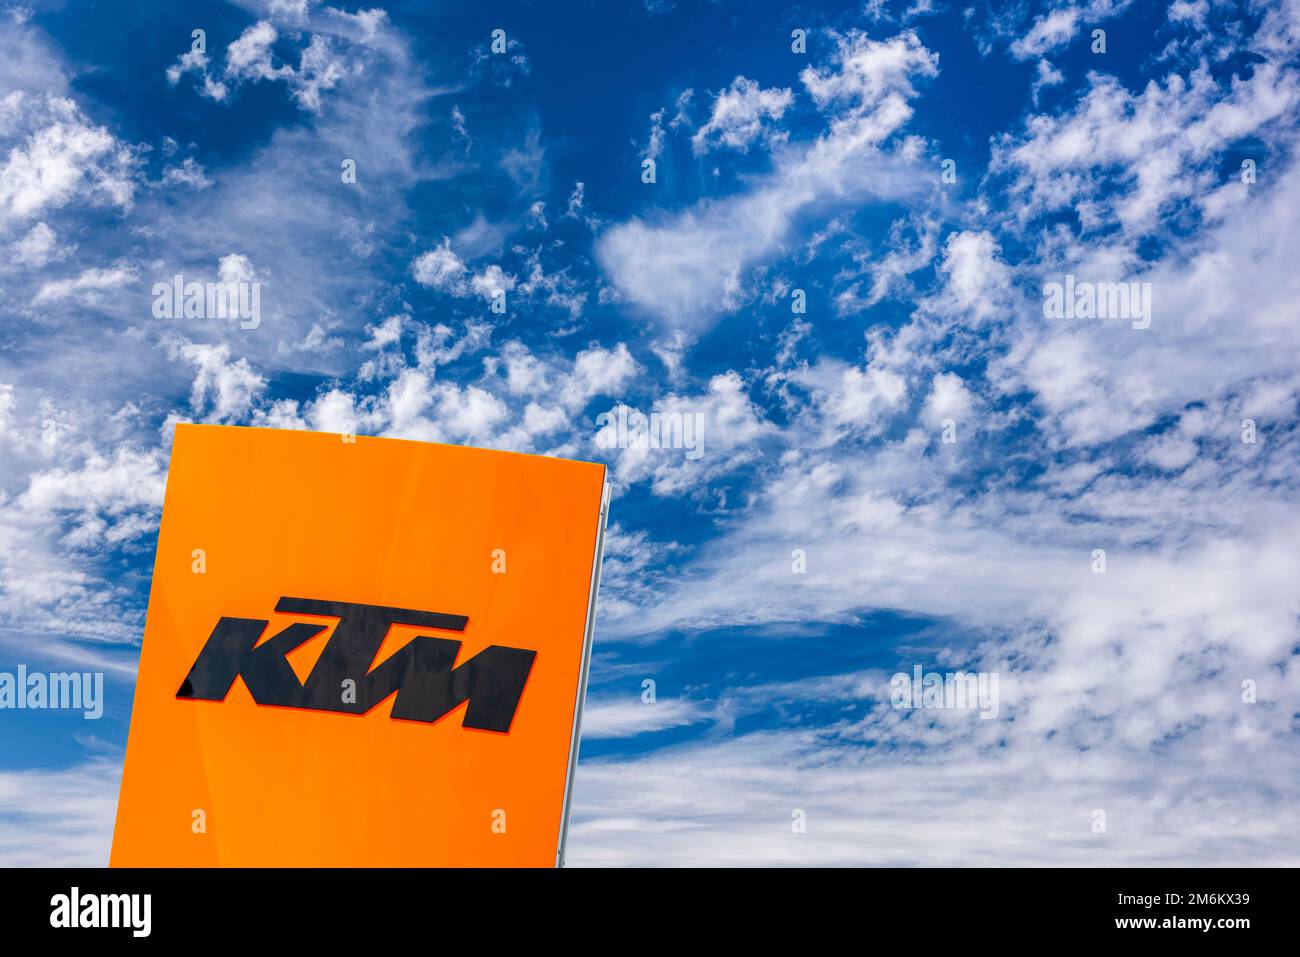 Advertising and company sign of the company KTM Stock Photo